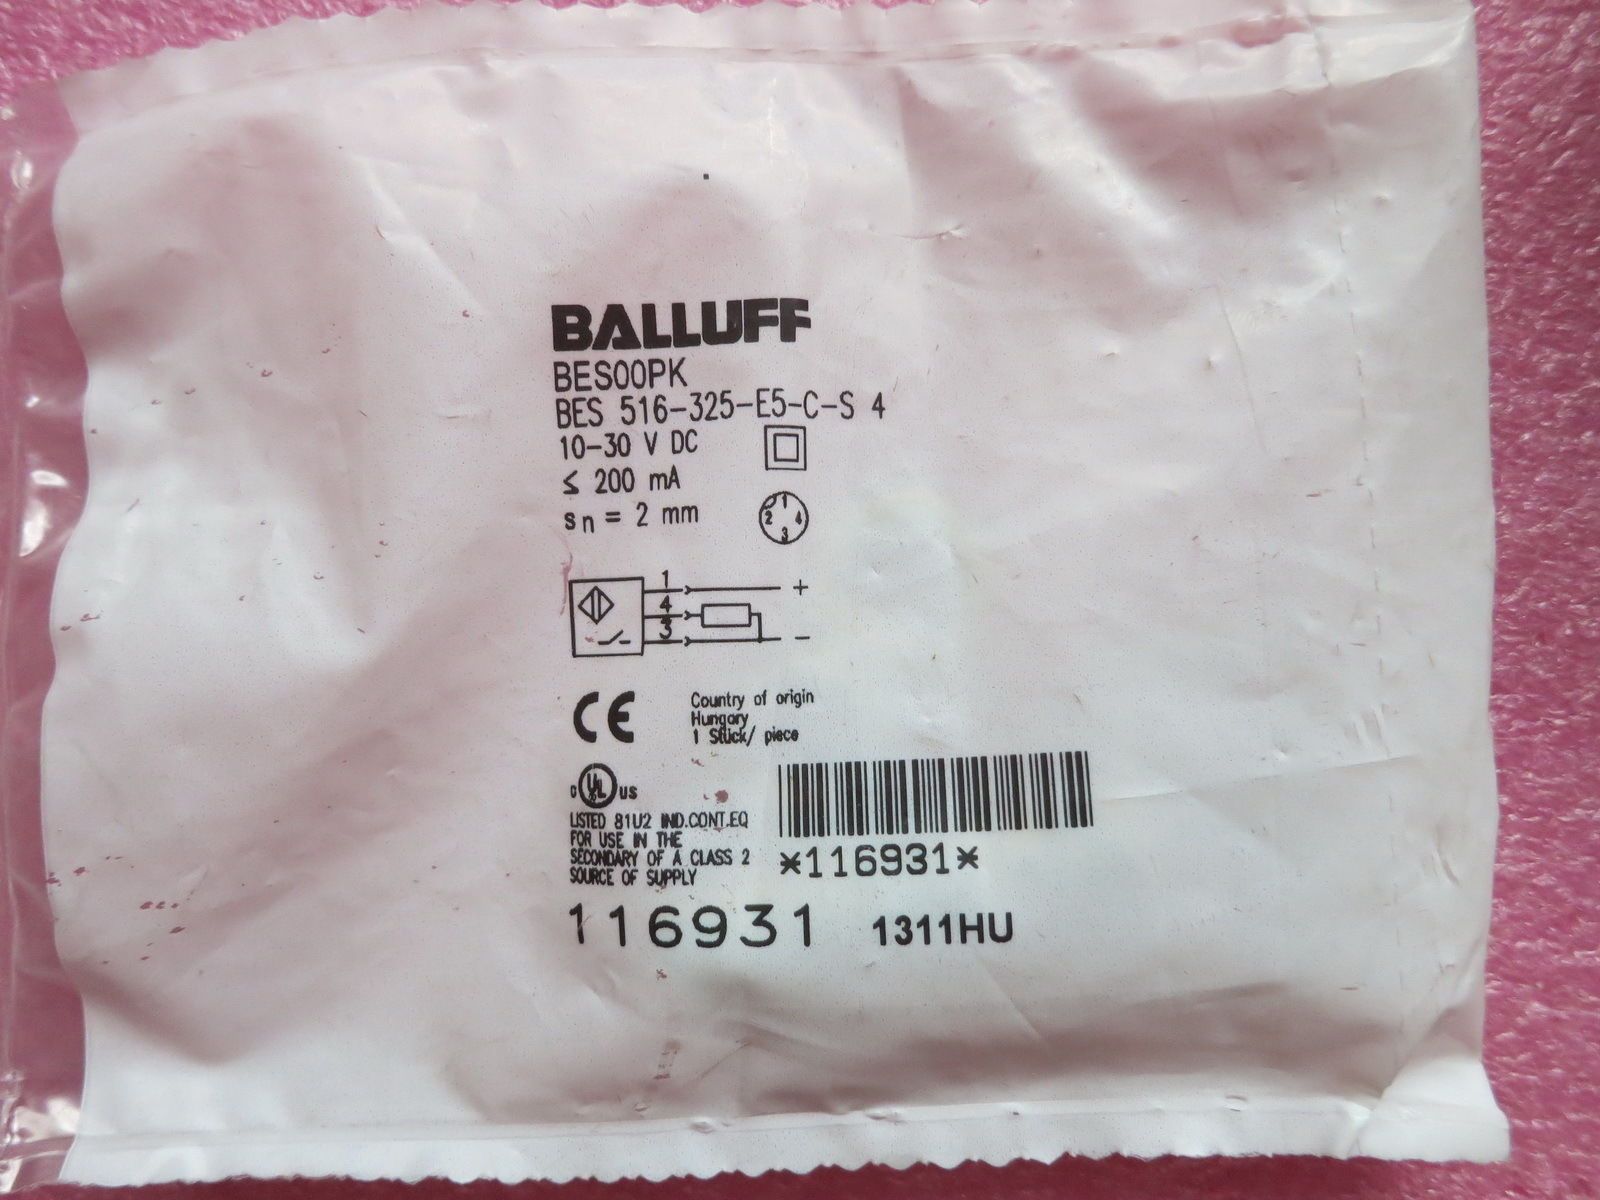 BES516-325-E5-C-S4 KOEED 1, 80%, BALLUFF, import_2020_10_10_031751, Other